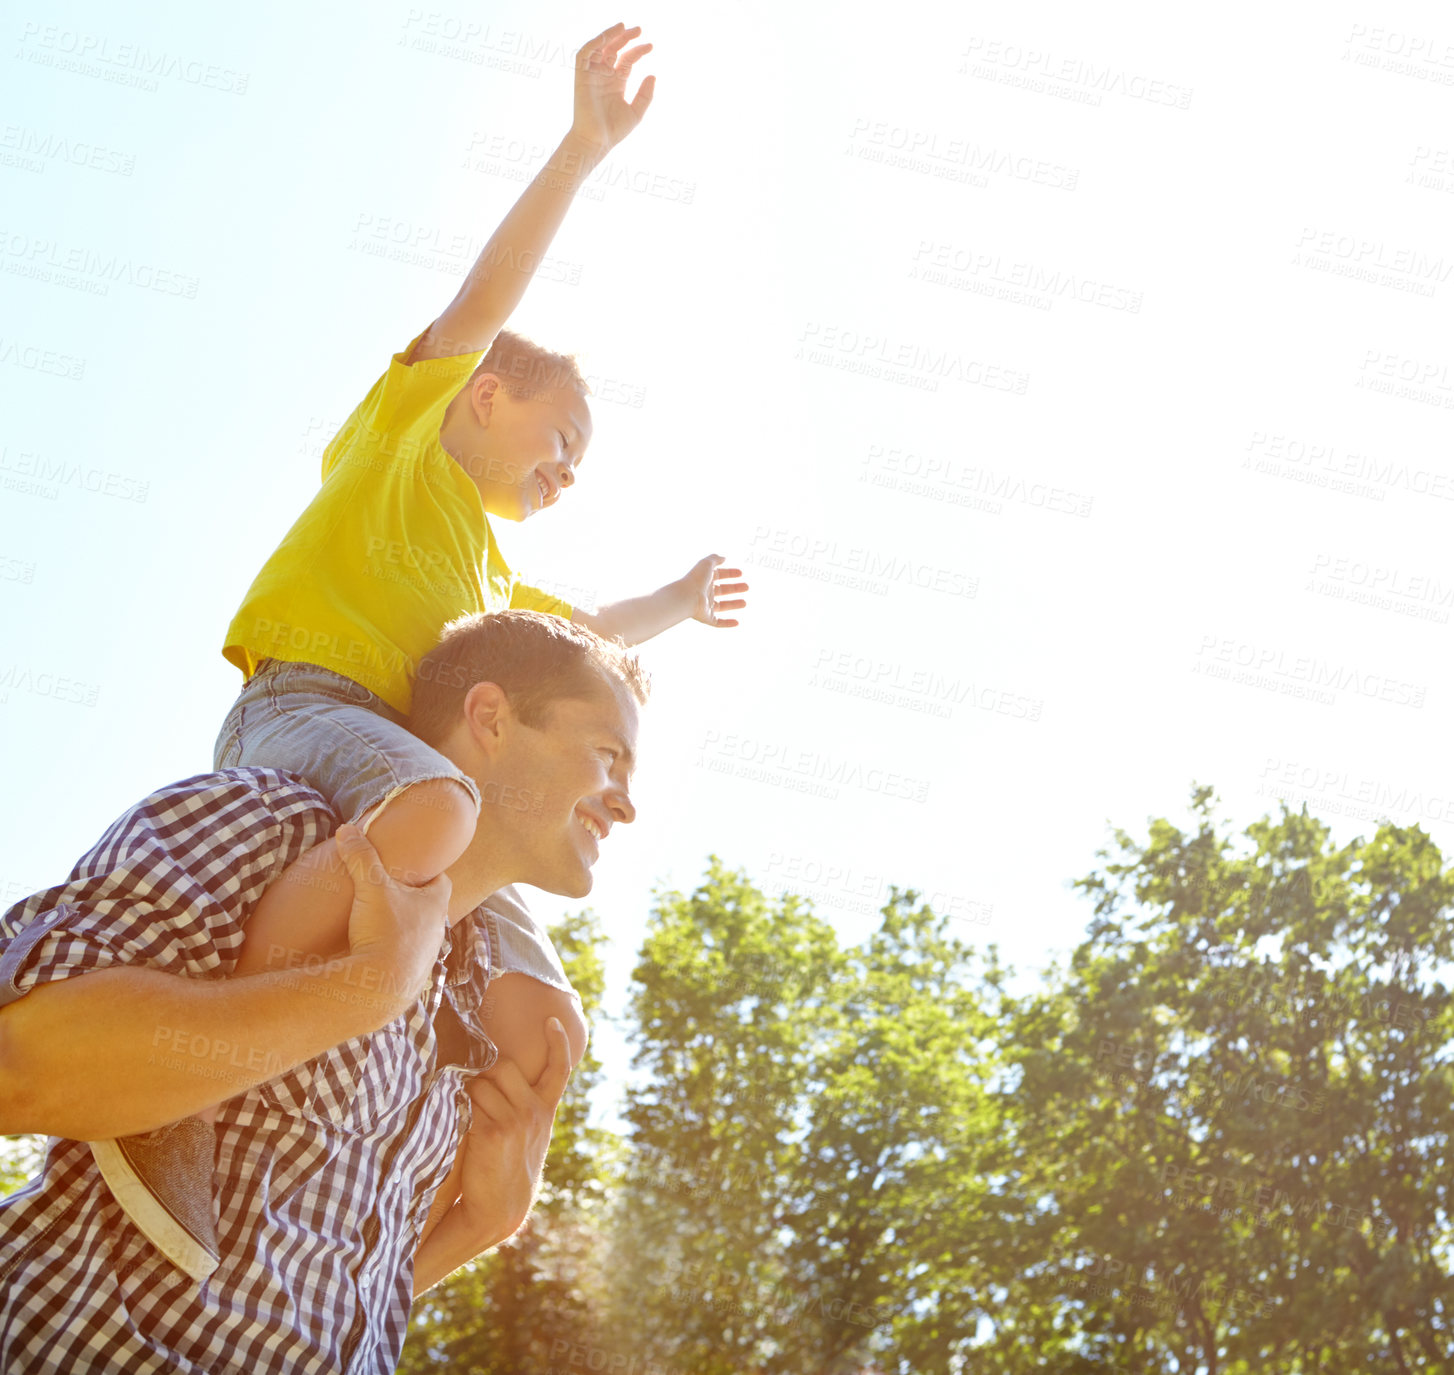 Buy stock photo Cropped shot of a cute young boy sitting on his father's shoulders and stretching his arms up